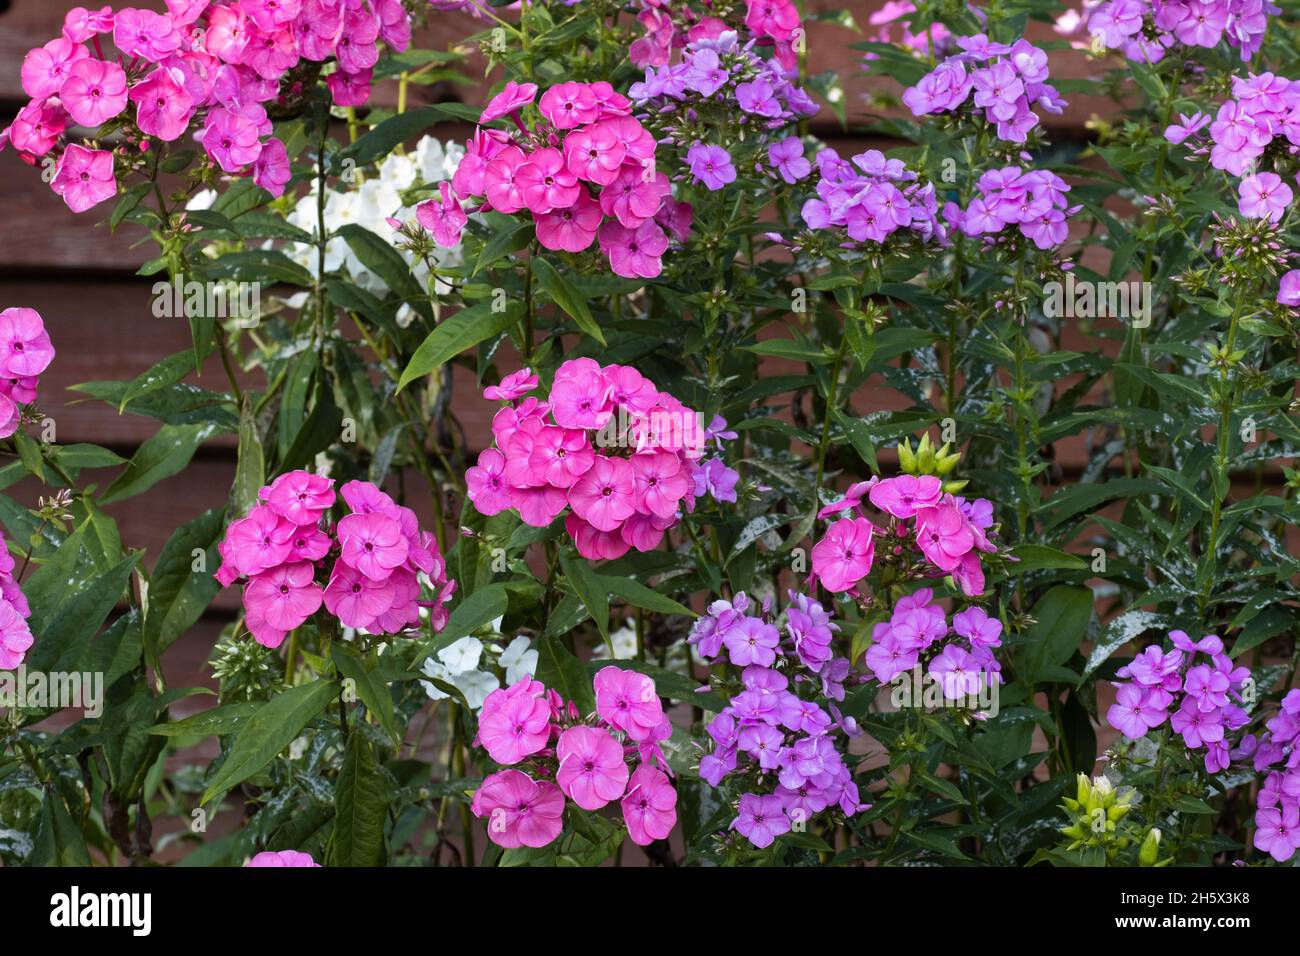 Pinkish Phloxes by a reddish wooden wall in European garden. Stock Photo